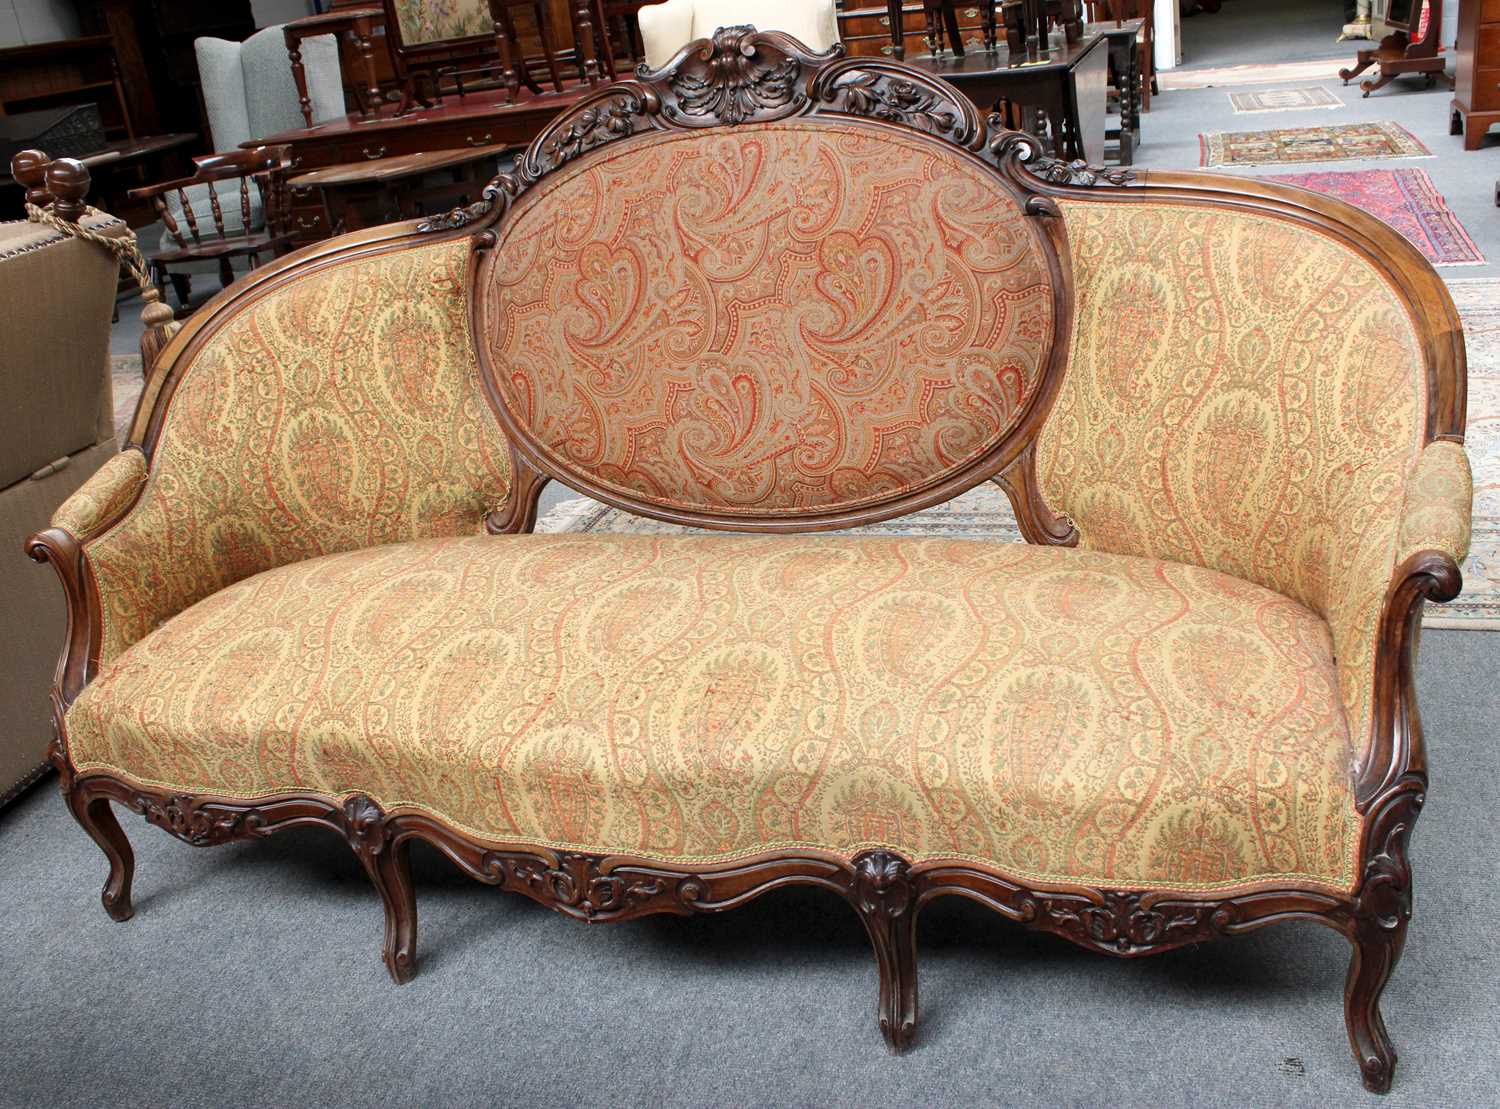 A Mid Victorian Carved Rosewood Settee Dimensions - 110cm by 180cm by 70cm Top section of carved